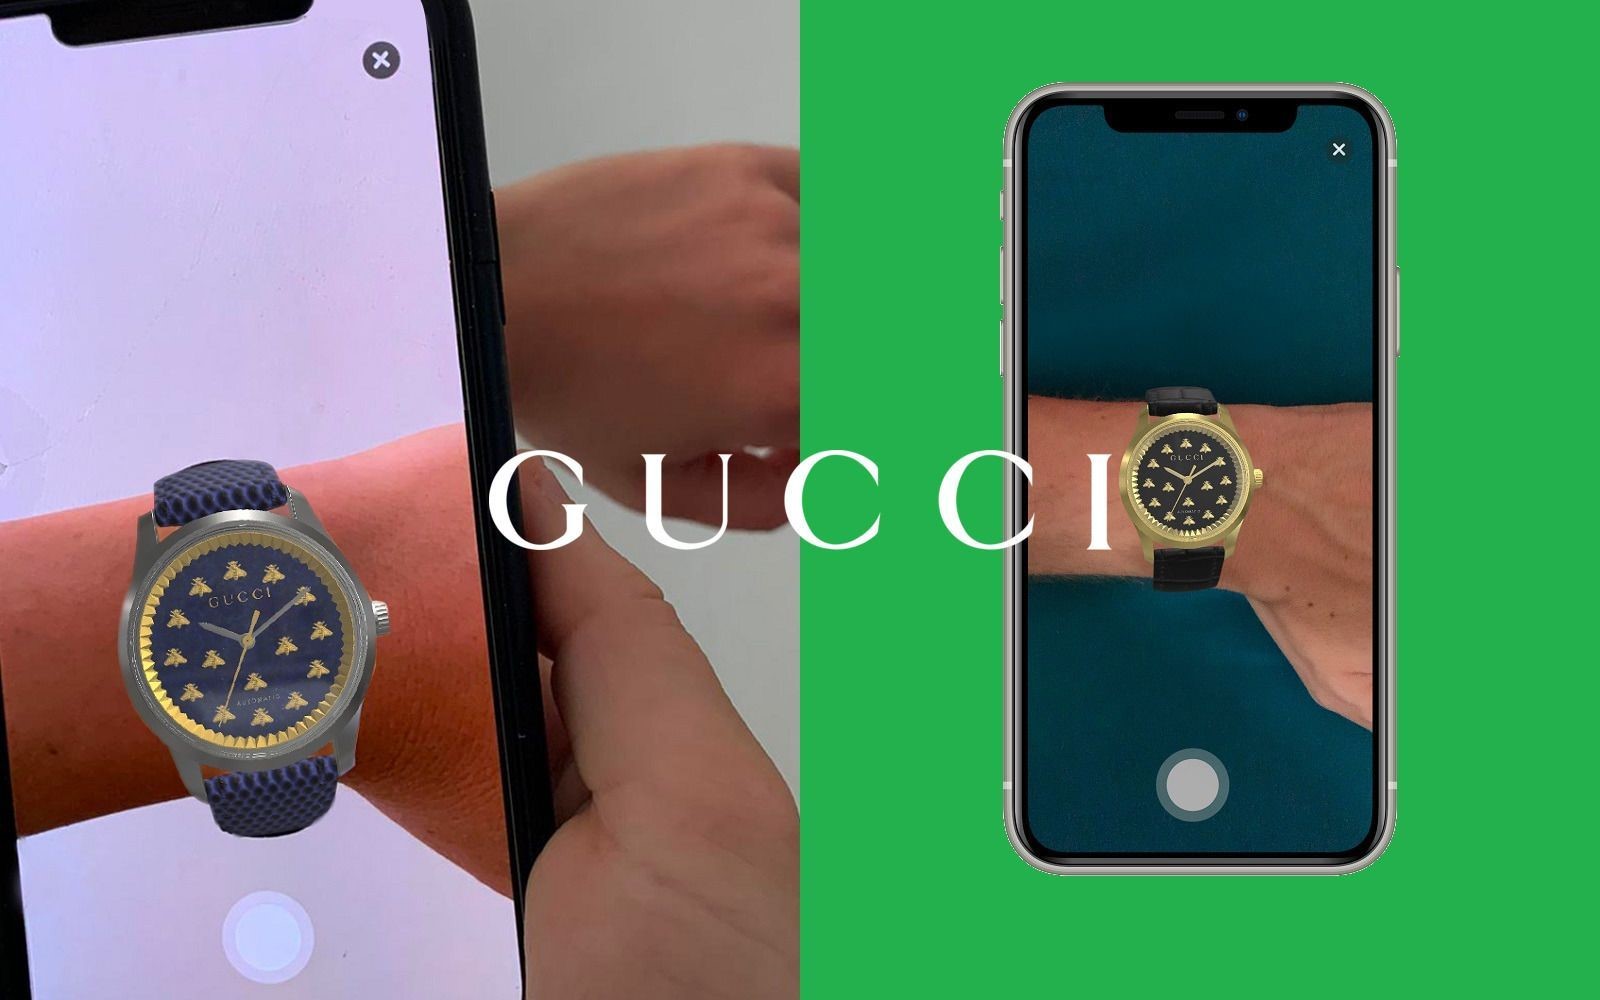 Gucci Watch AR Try-on